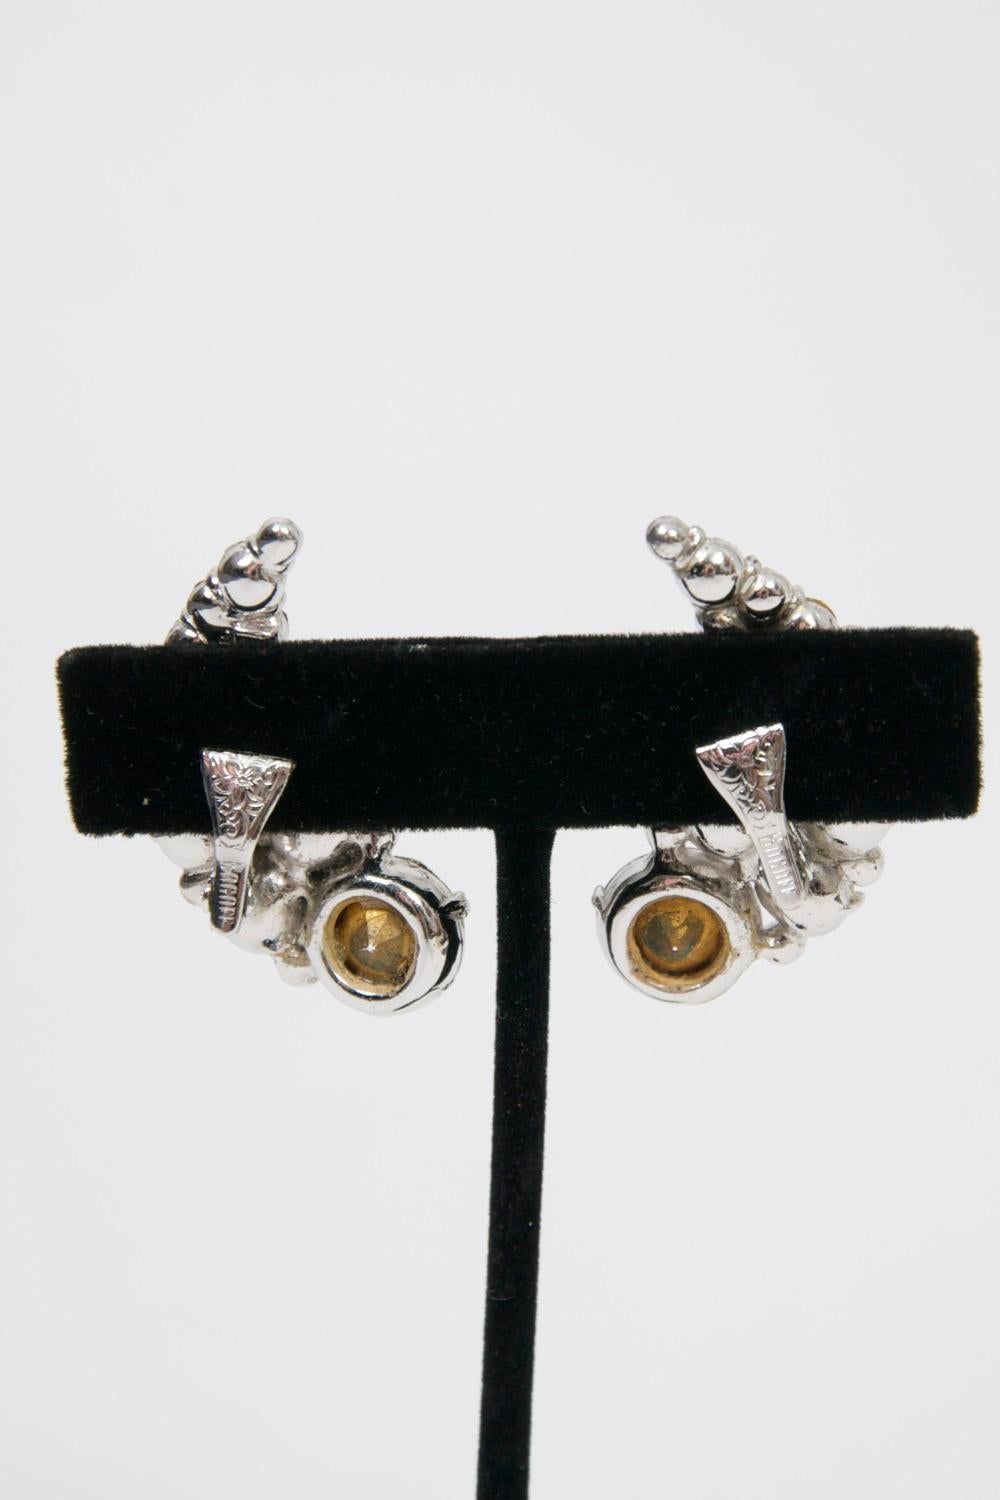 Known for their high quality costume jewelry, Jewels by Bogoff, located in Chicago, was a leading manufacturer of rhinestone jewelry from 1940 thru the early 1960s. This pair of clip-on earrings features round rhinestones of various sizes arranged